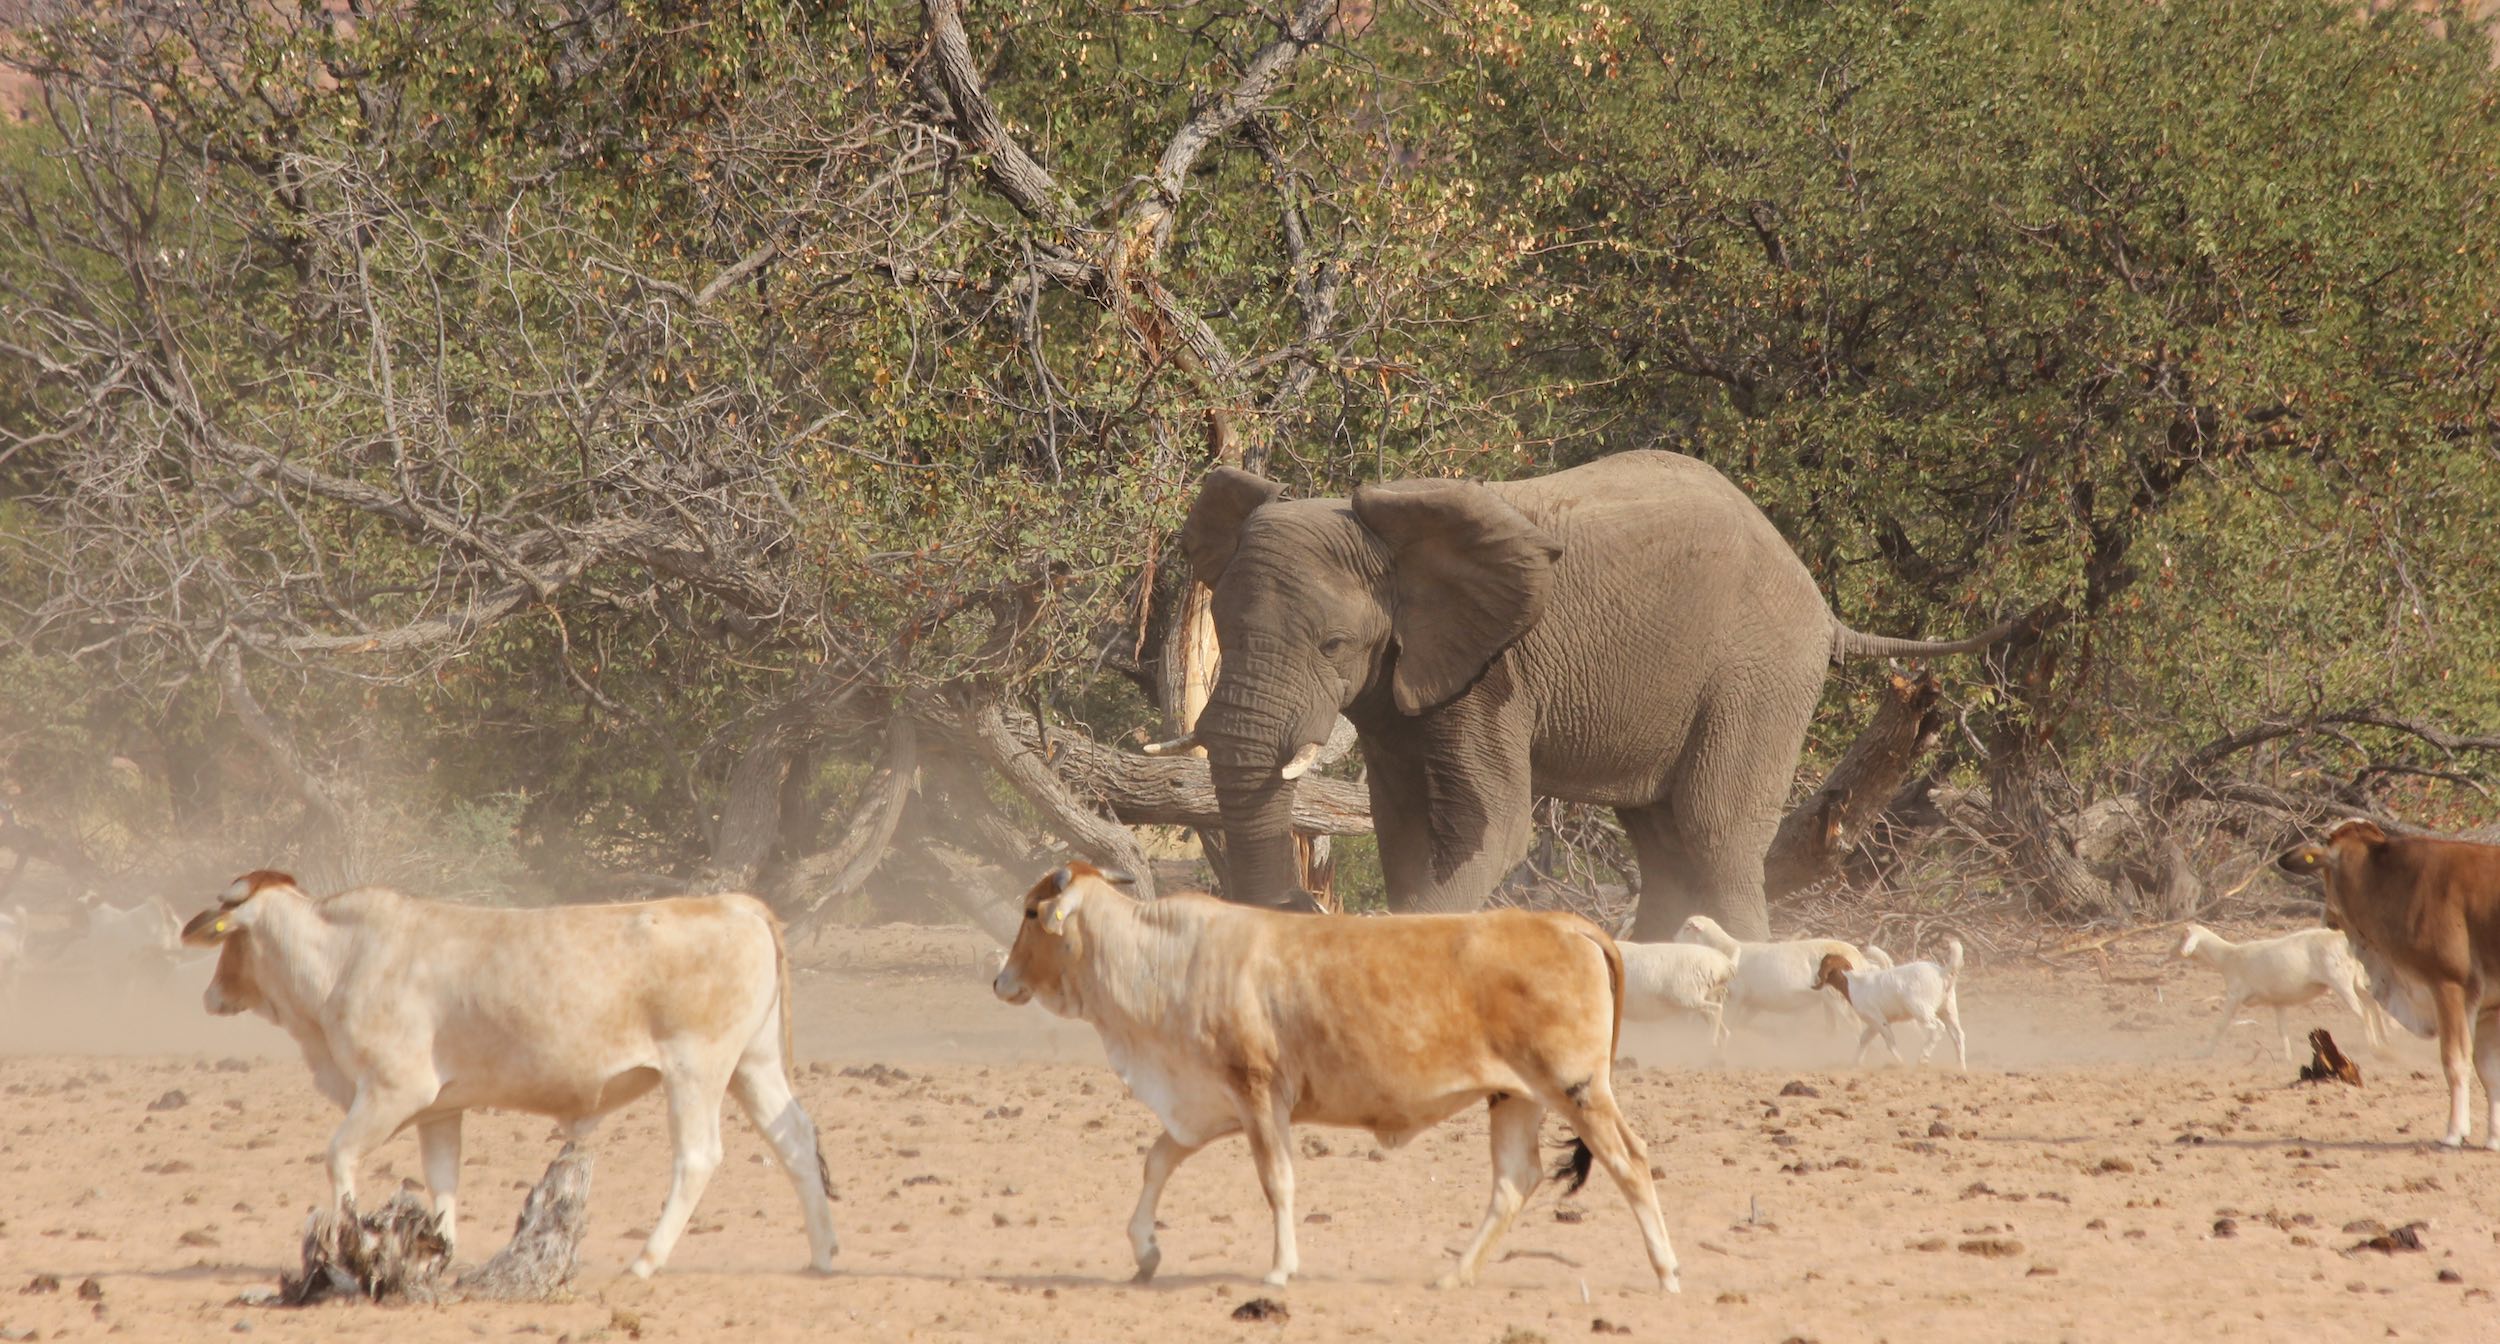 Elephant with cows in Namibia